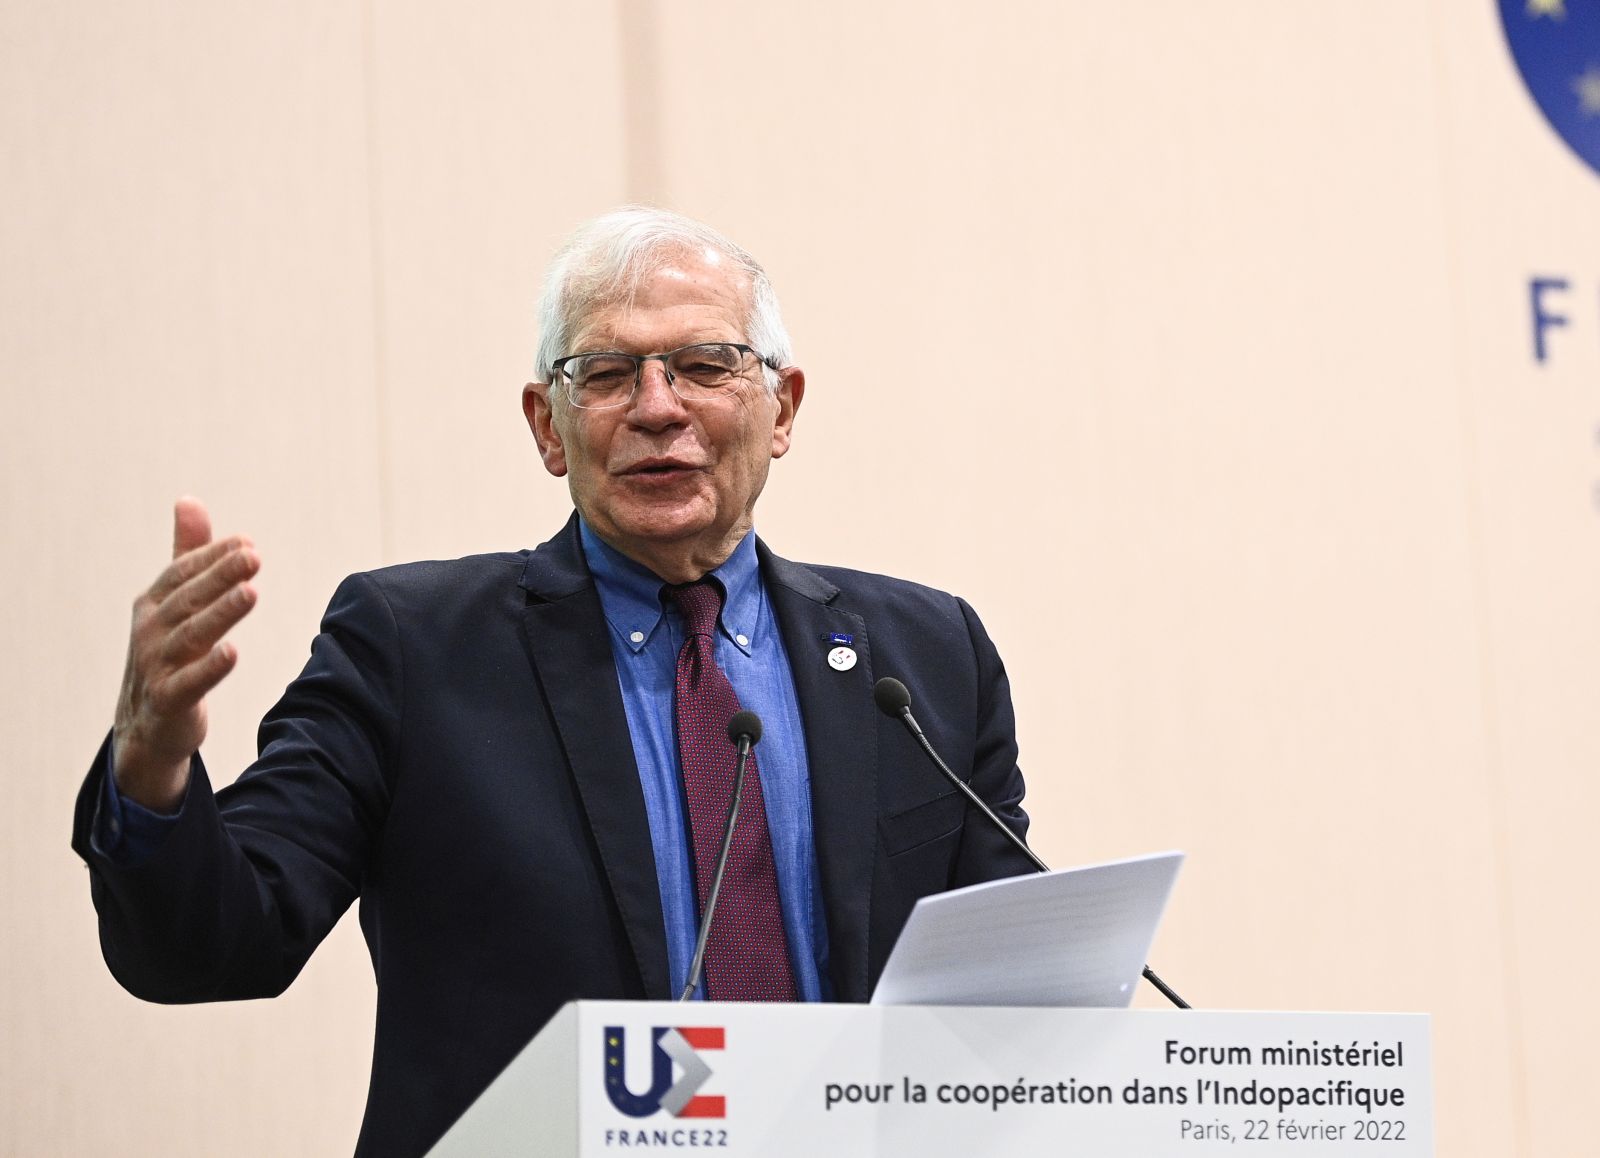 epa09776648 High Representative of the European Union for Foreign Affairs and Security Policy Josep Borrell gestures as he delivers a speech during the Indo-Pacific Ministerial Cooperation Forum as part of the French EU Council Presidency in Paris, France, 22 February 2022. The forum brings together foreign ministers of EU member states and some 30 countries in the Indo-Pacific region, representatives of European institutions and representatives of the main regional organizations.  EPA/CHRISTOPHE ARCHAMBAULT / POOL MAXPPP OUT